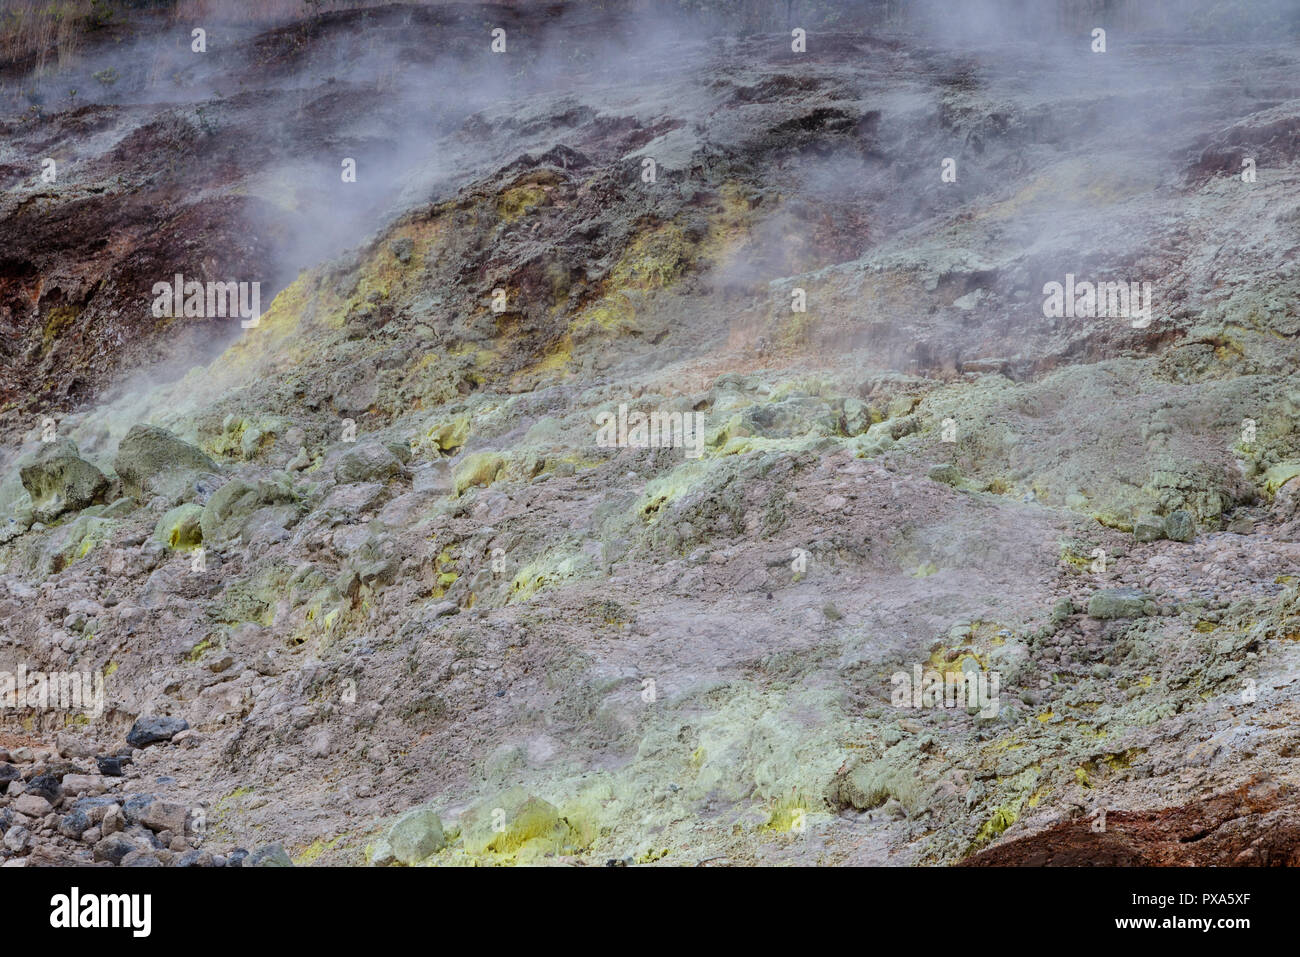 Sulfur Bank in Volcano National Park in Hawaii. Yellow sulfer deposits are on the ground; volcanic gas rise into the air. Stock Photo